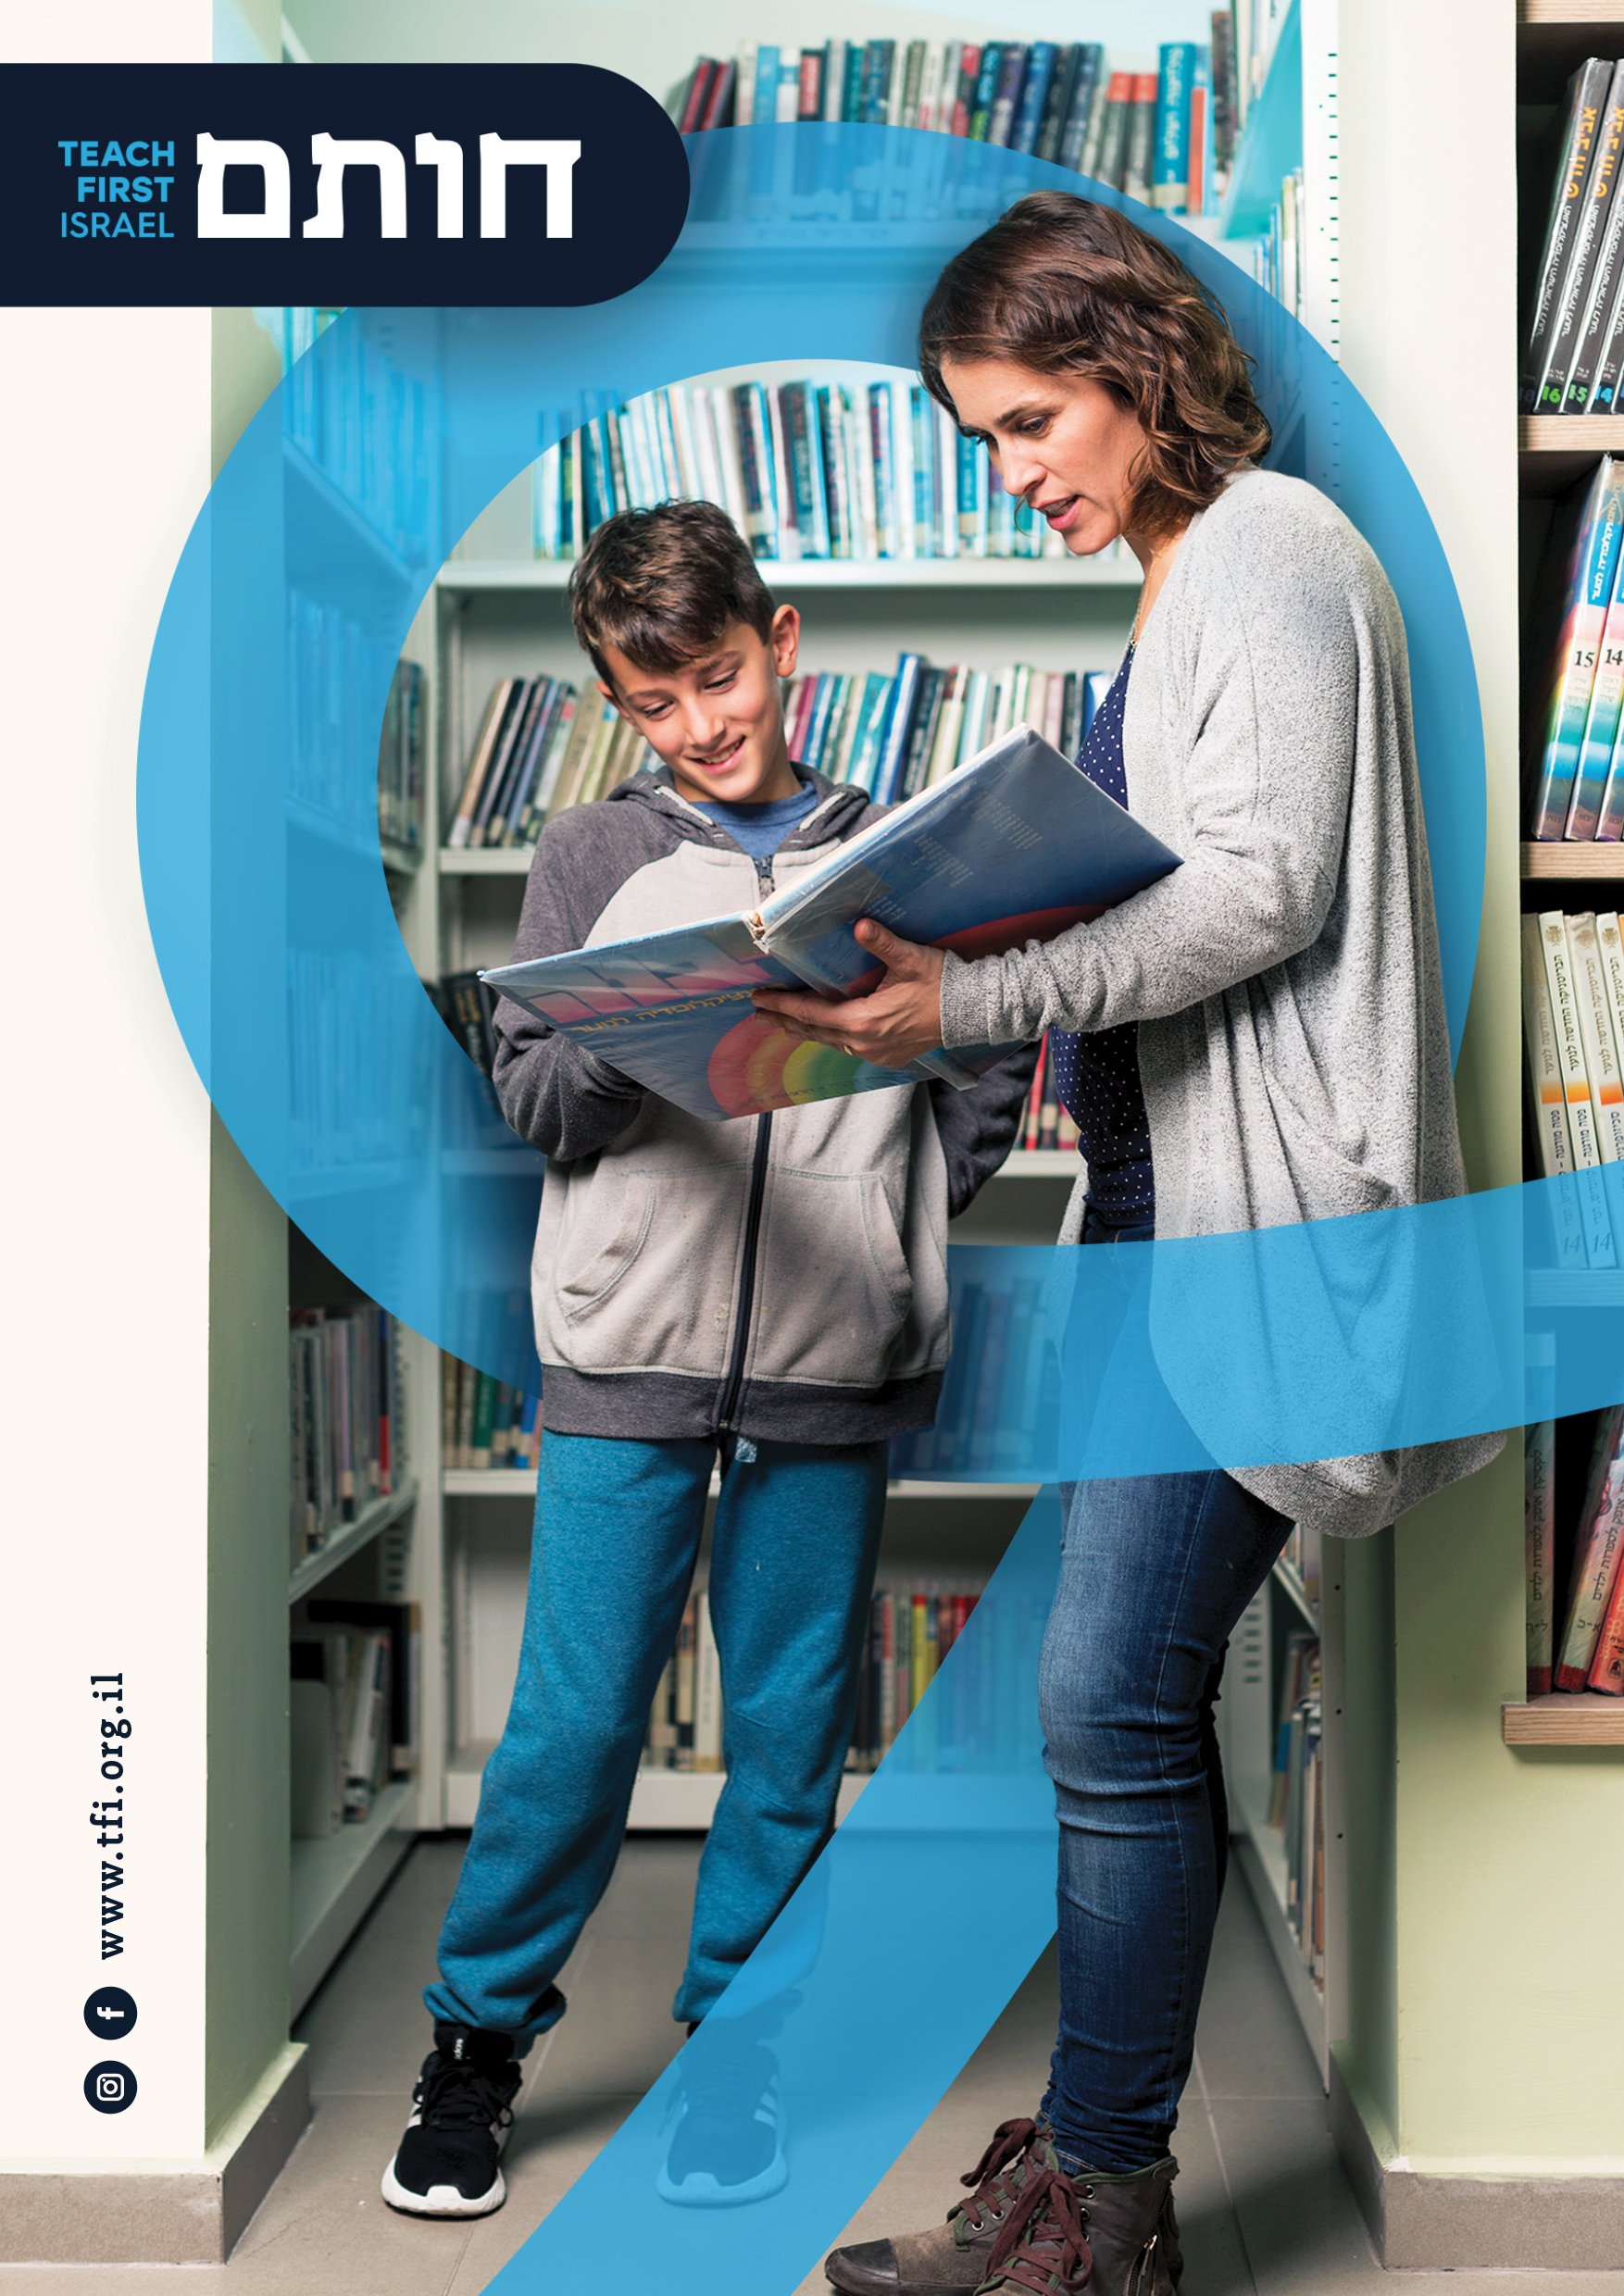 An online tear from Teach First Israel shows a student looking through a library book with a teacher